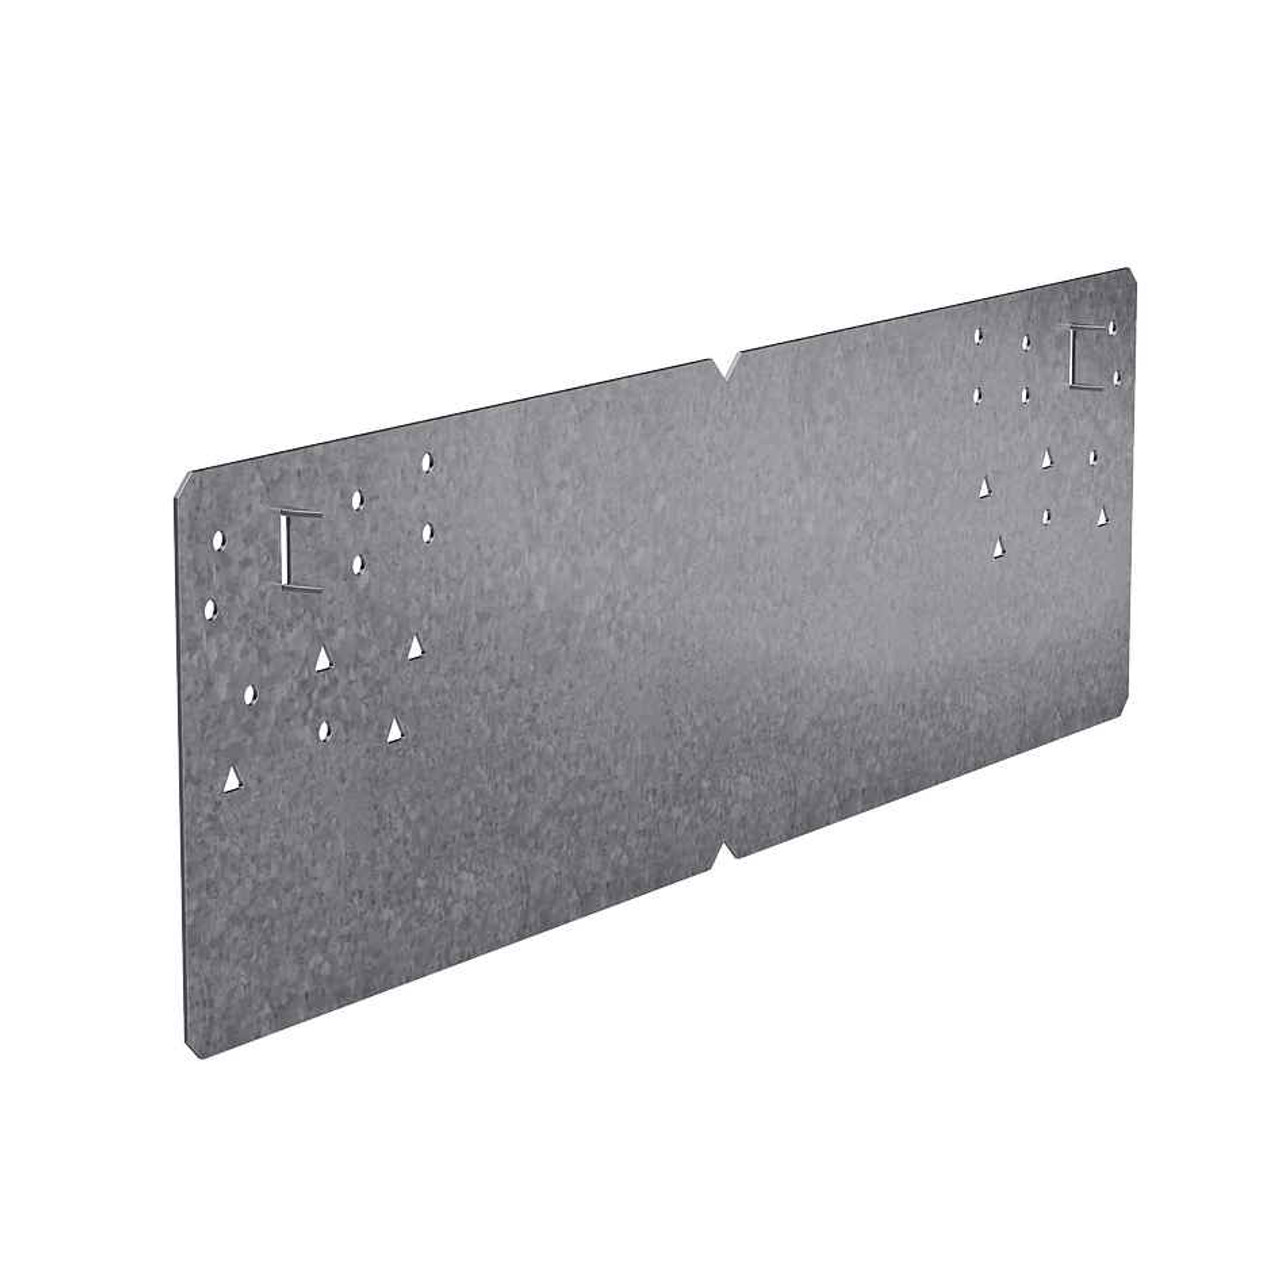 Simpson Strong-Tie PSPN516Z 5 x 16-5/16-Inch Protecting Shield Plate 50 Pk